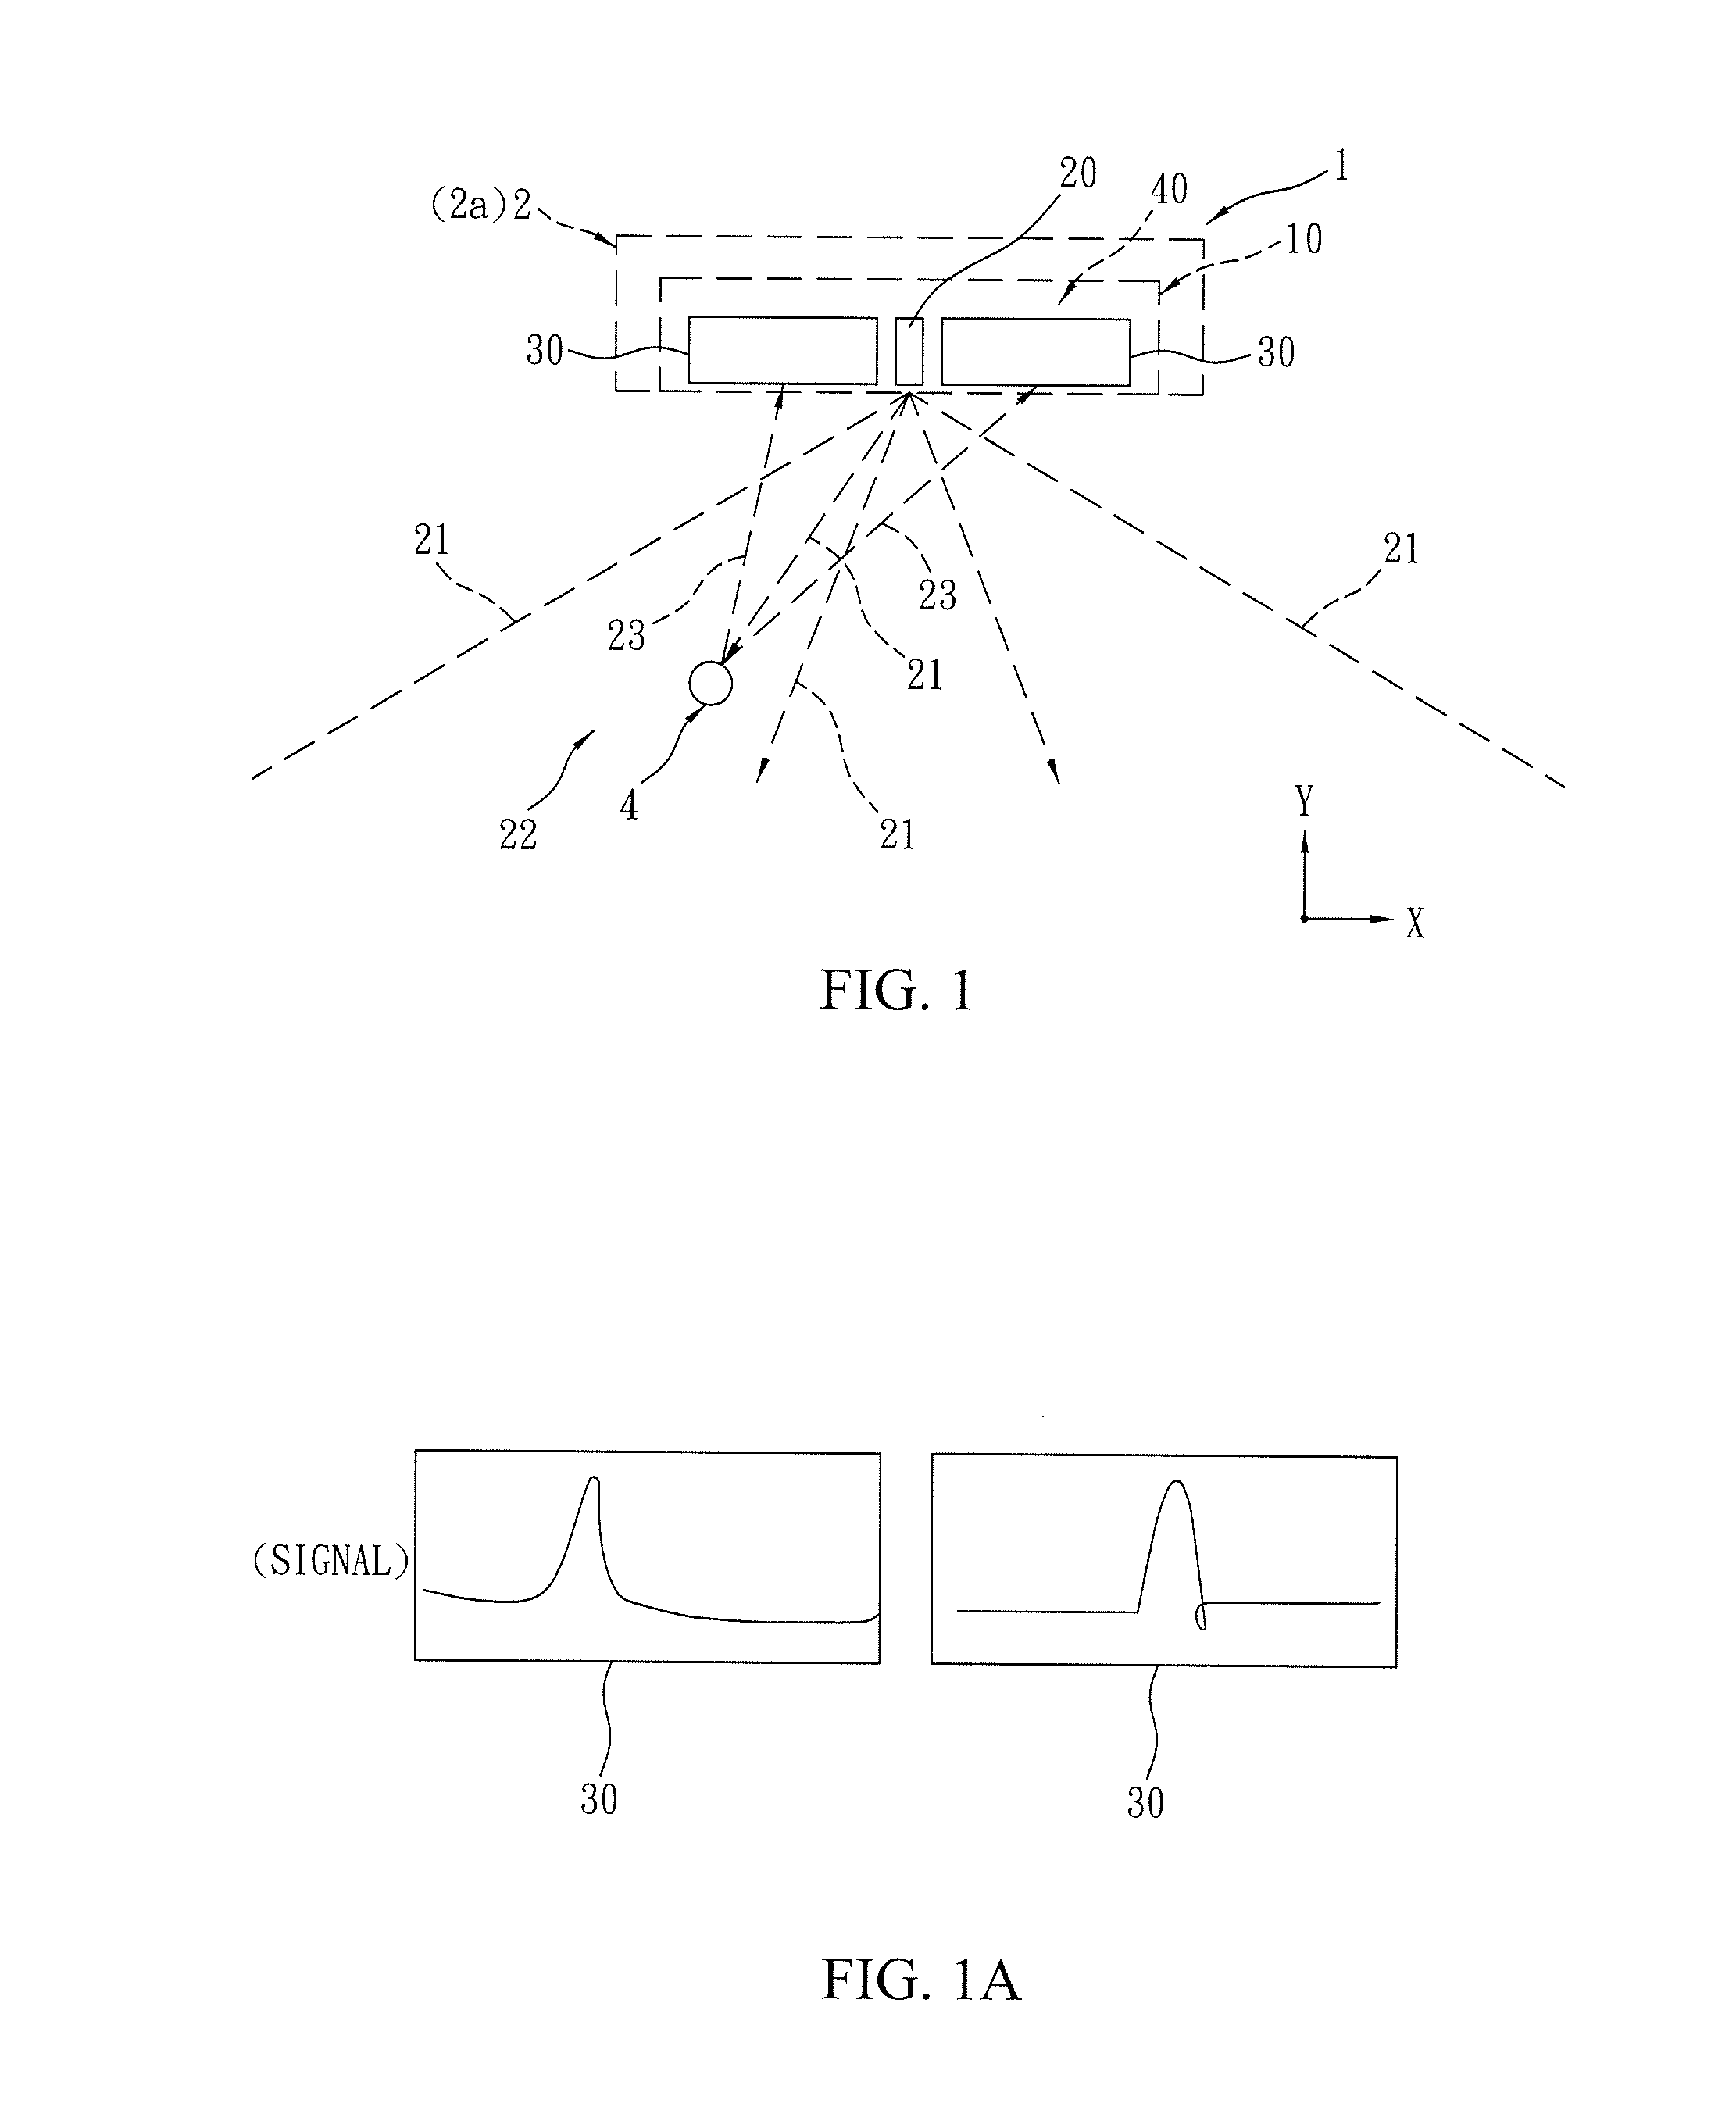 Virtual two-dimensional positioning module of input device and virtual device with the same